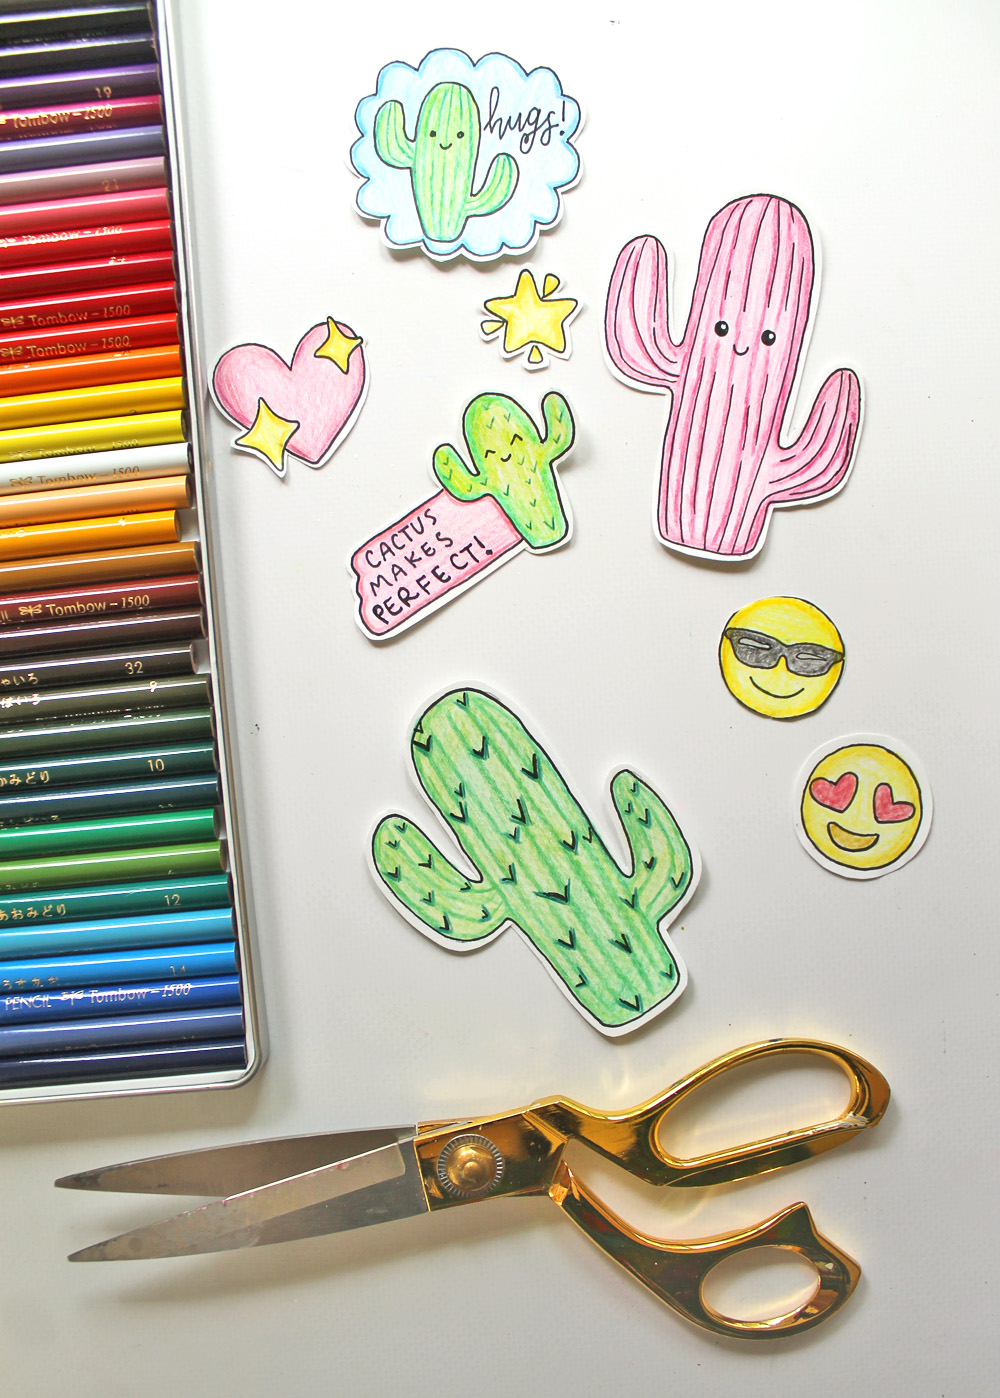 How to Make Simple Stickers From Your Photos